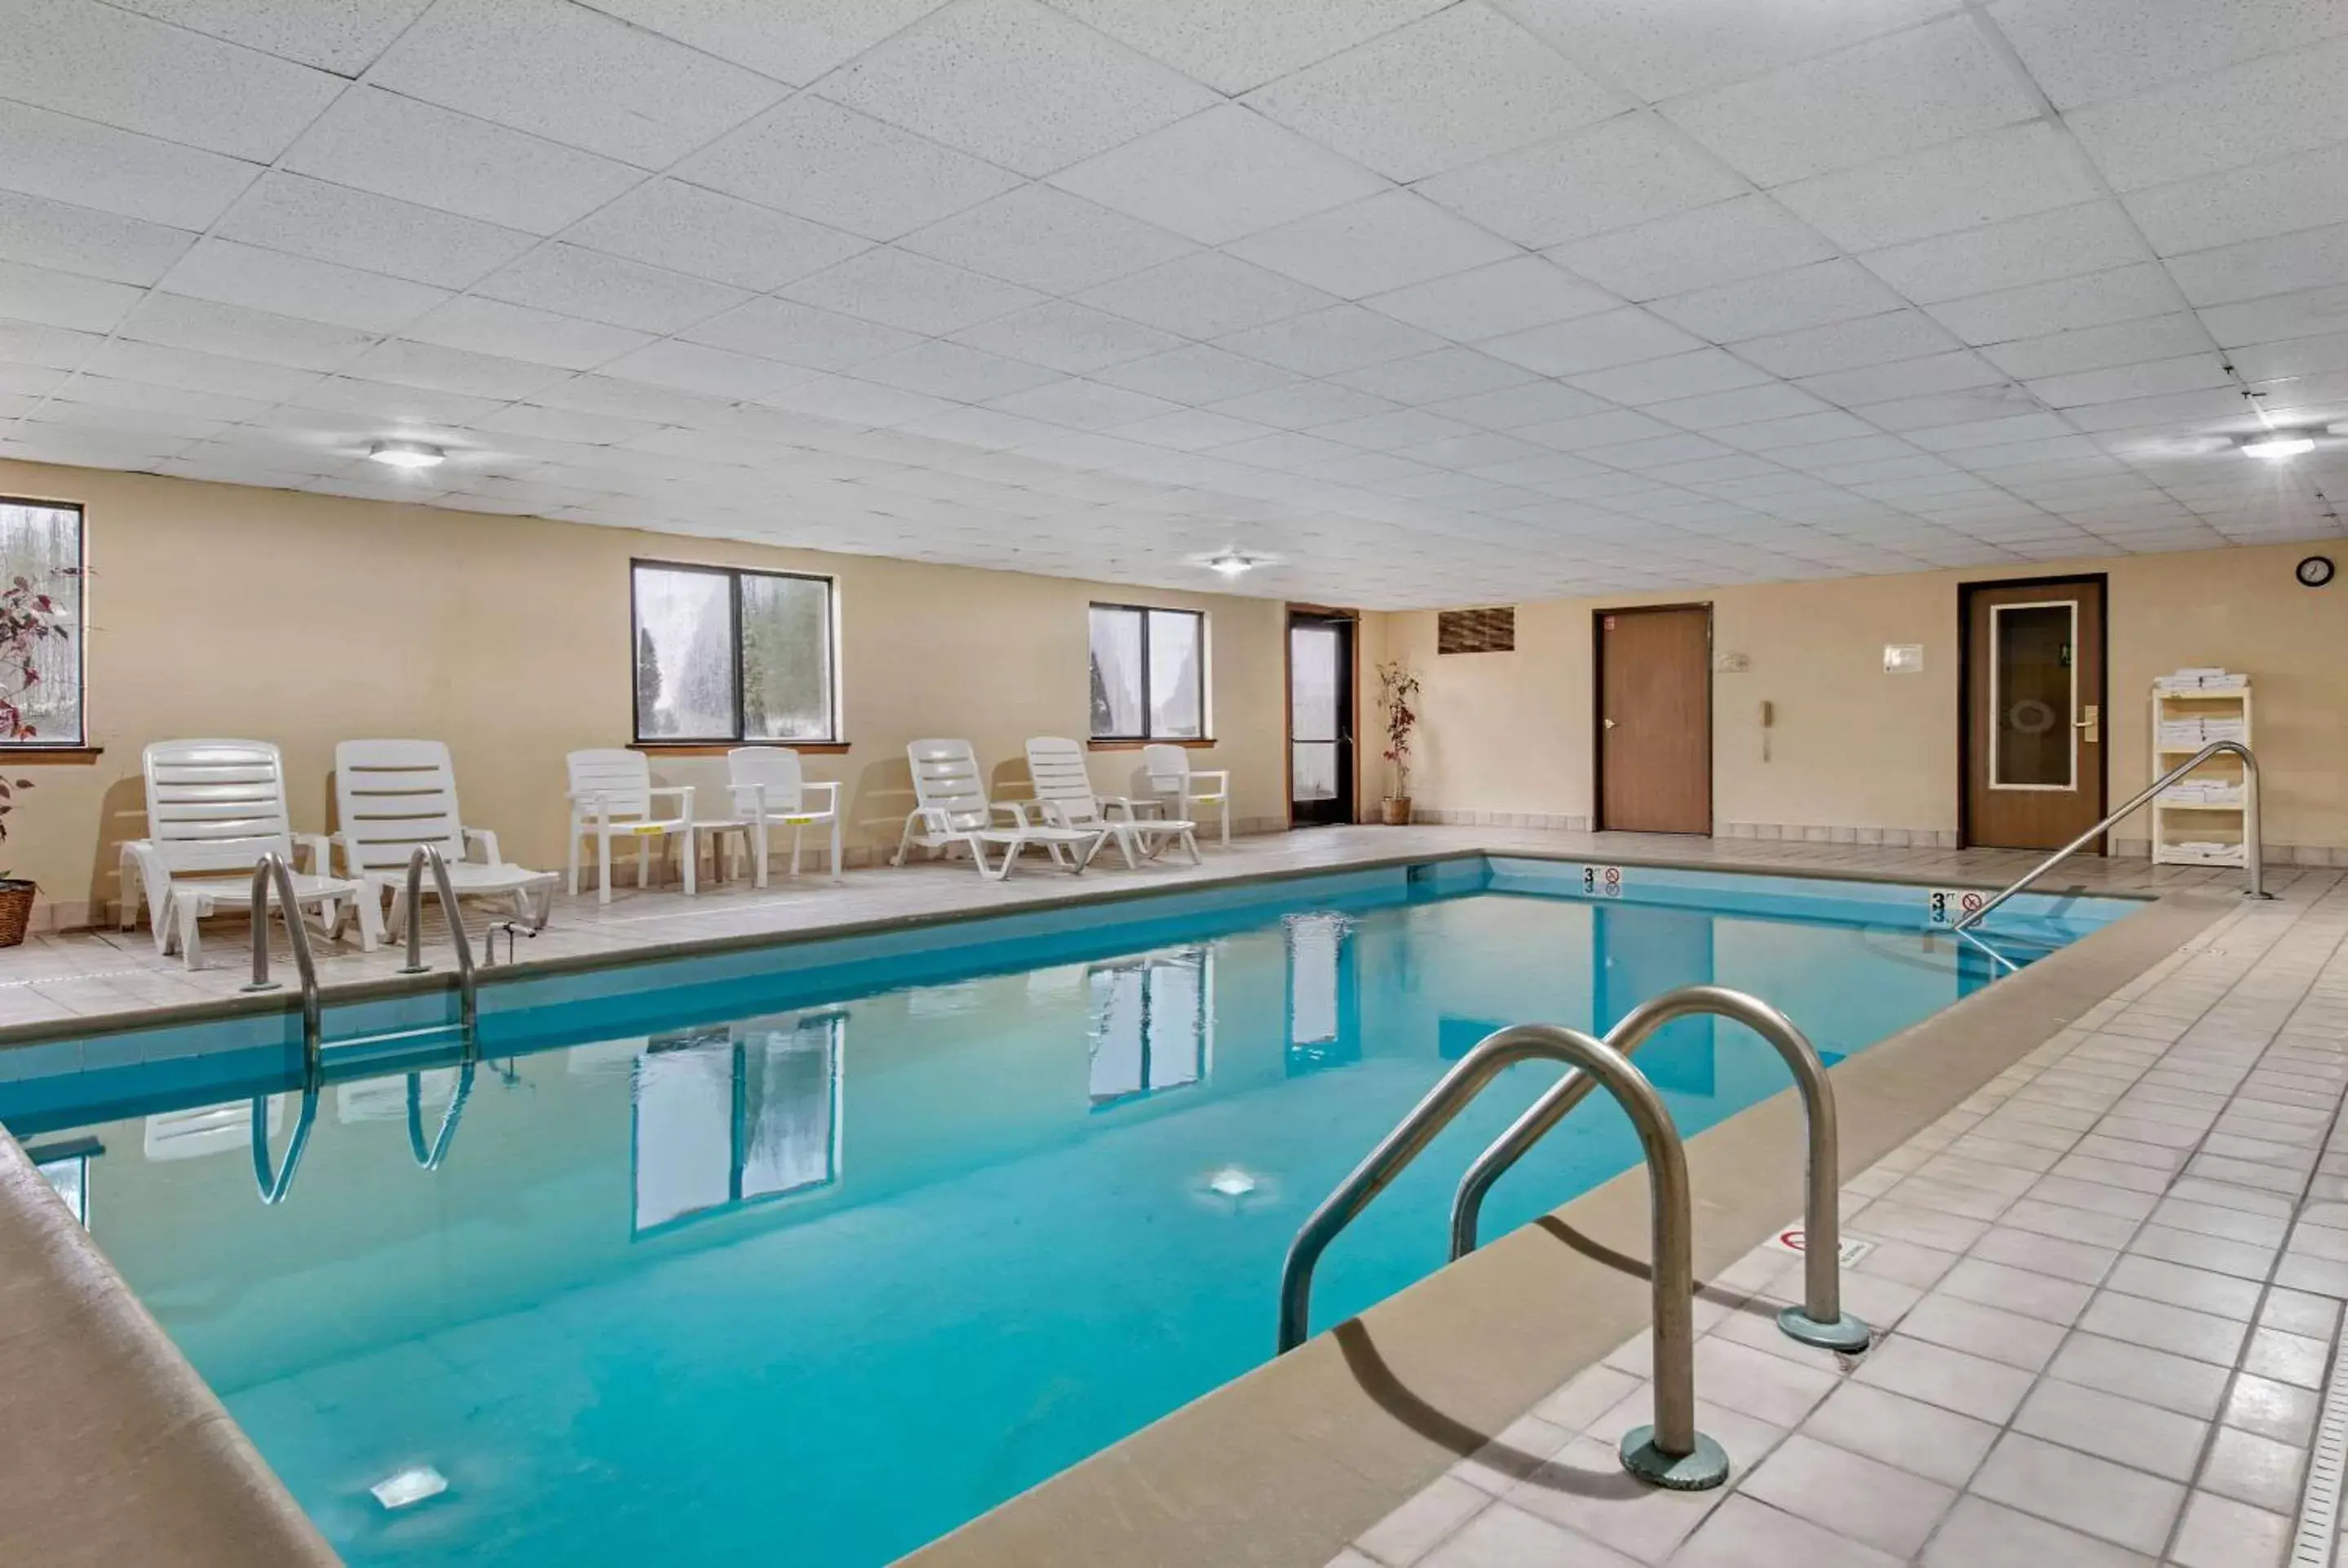 On site, Swimming Pool in Quality Inn & Suites Lebanon I-65